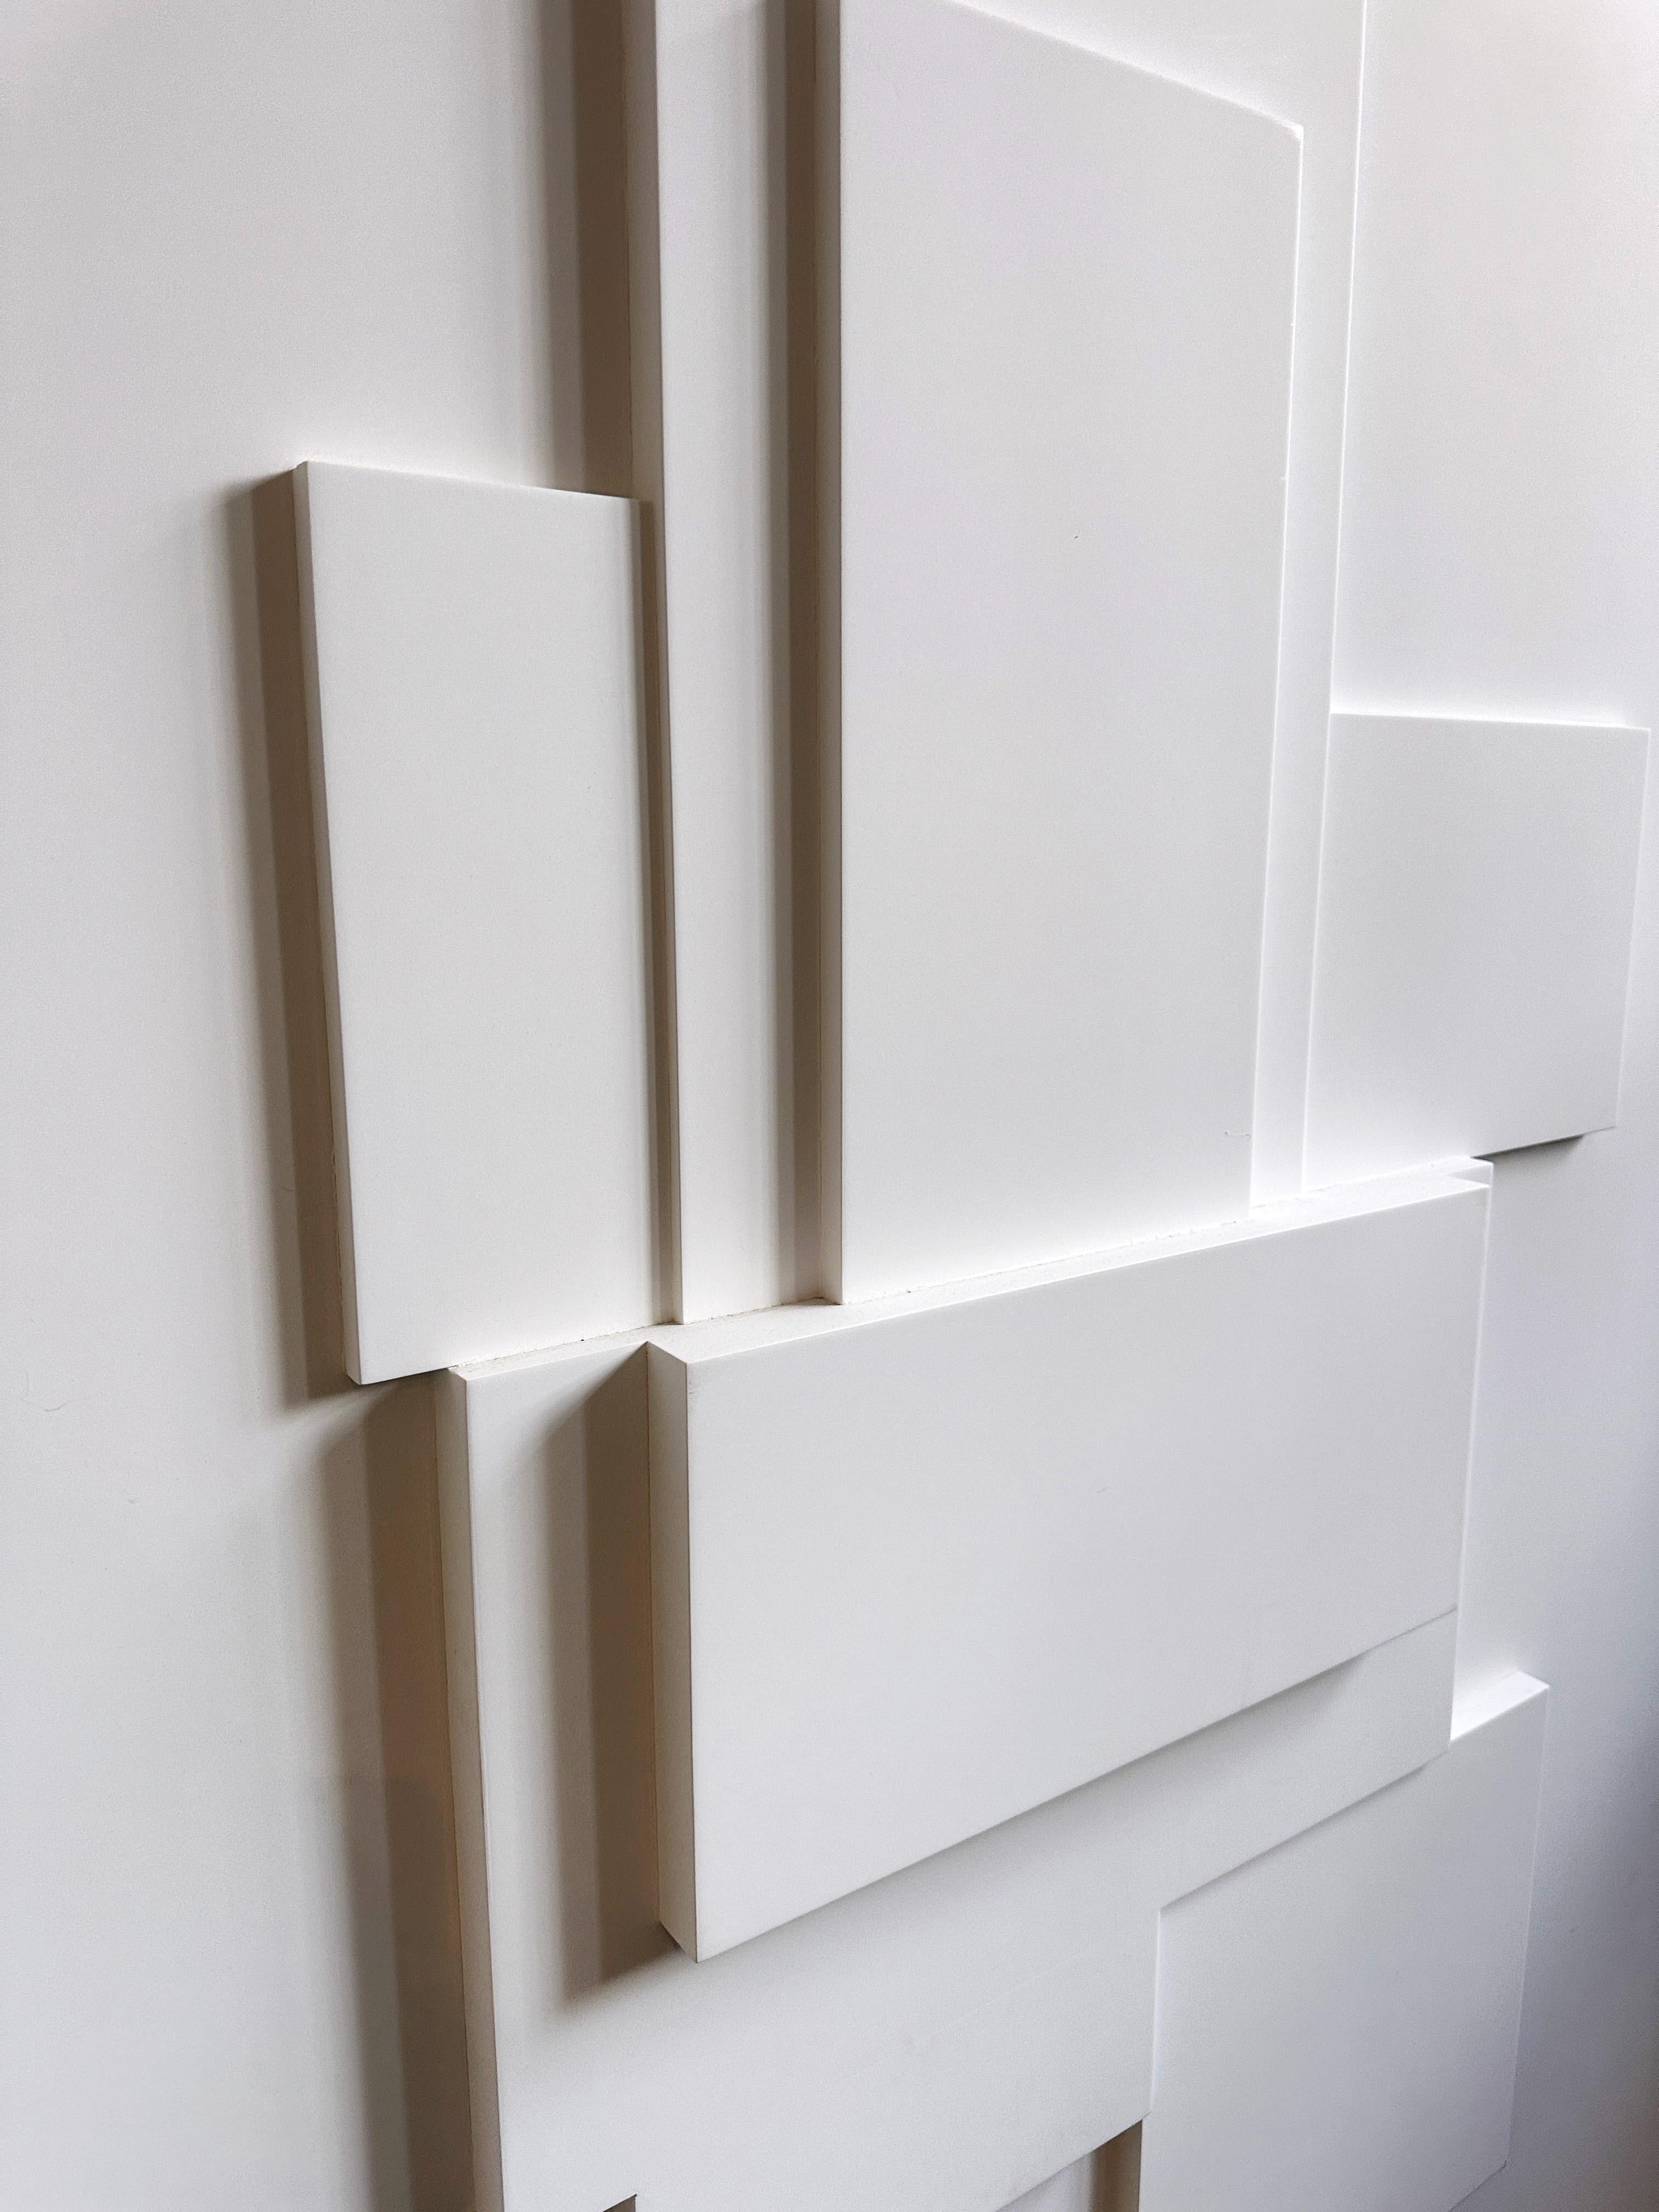 Contemporary White Lacquered Wood Construction Art Piece 